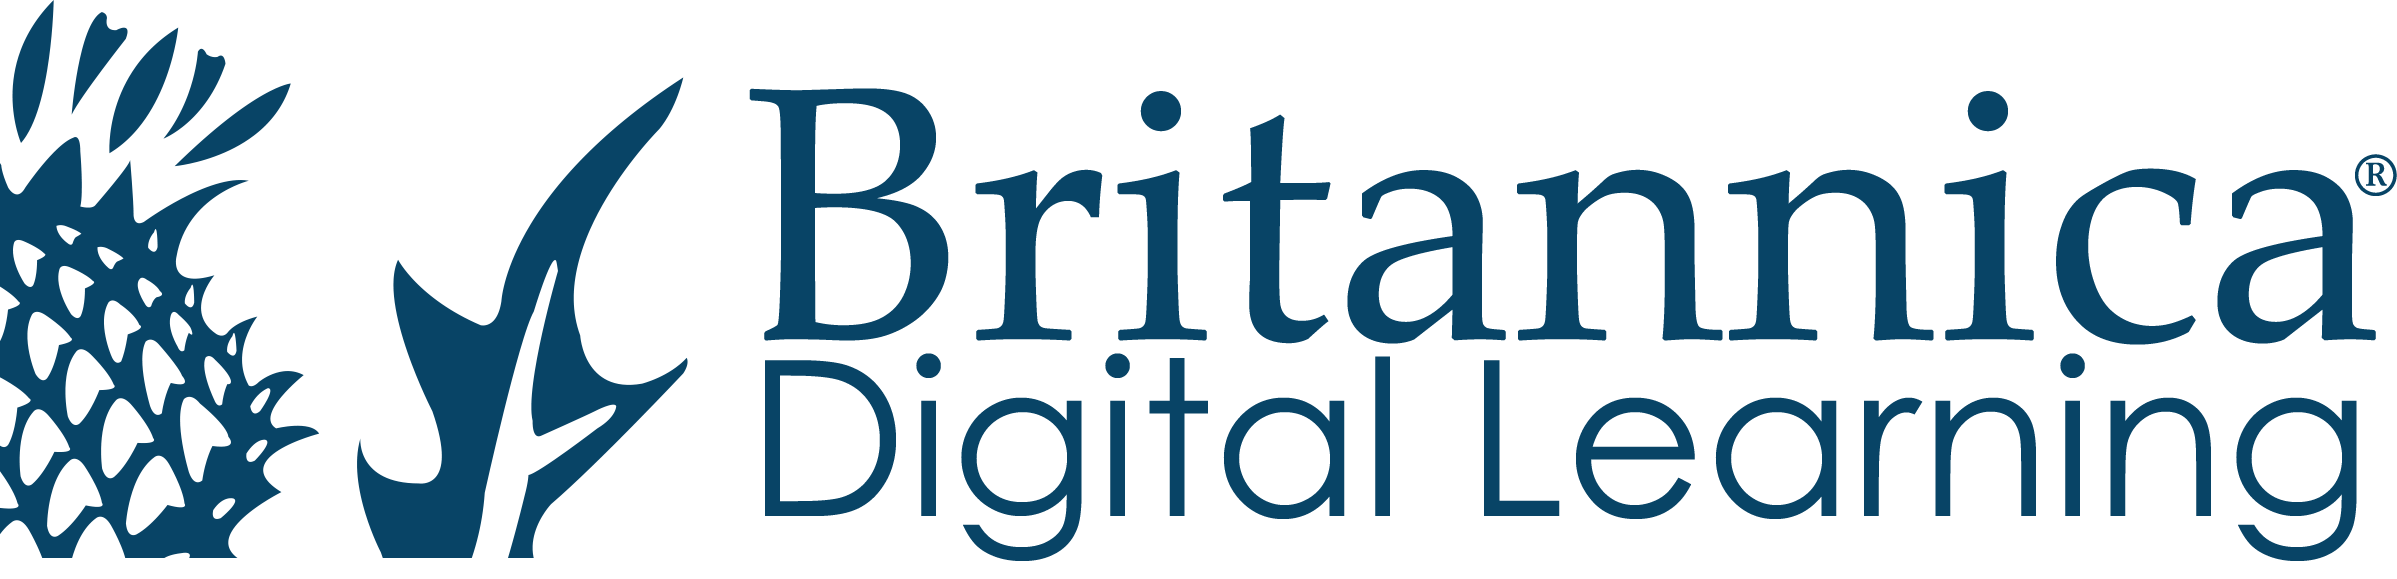 Britannica Digital Learning - Stand No. 21